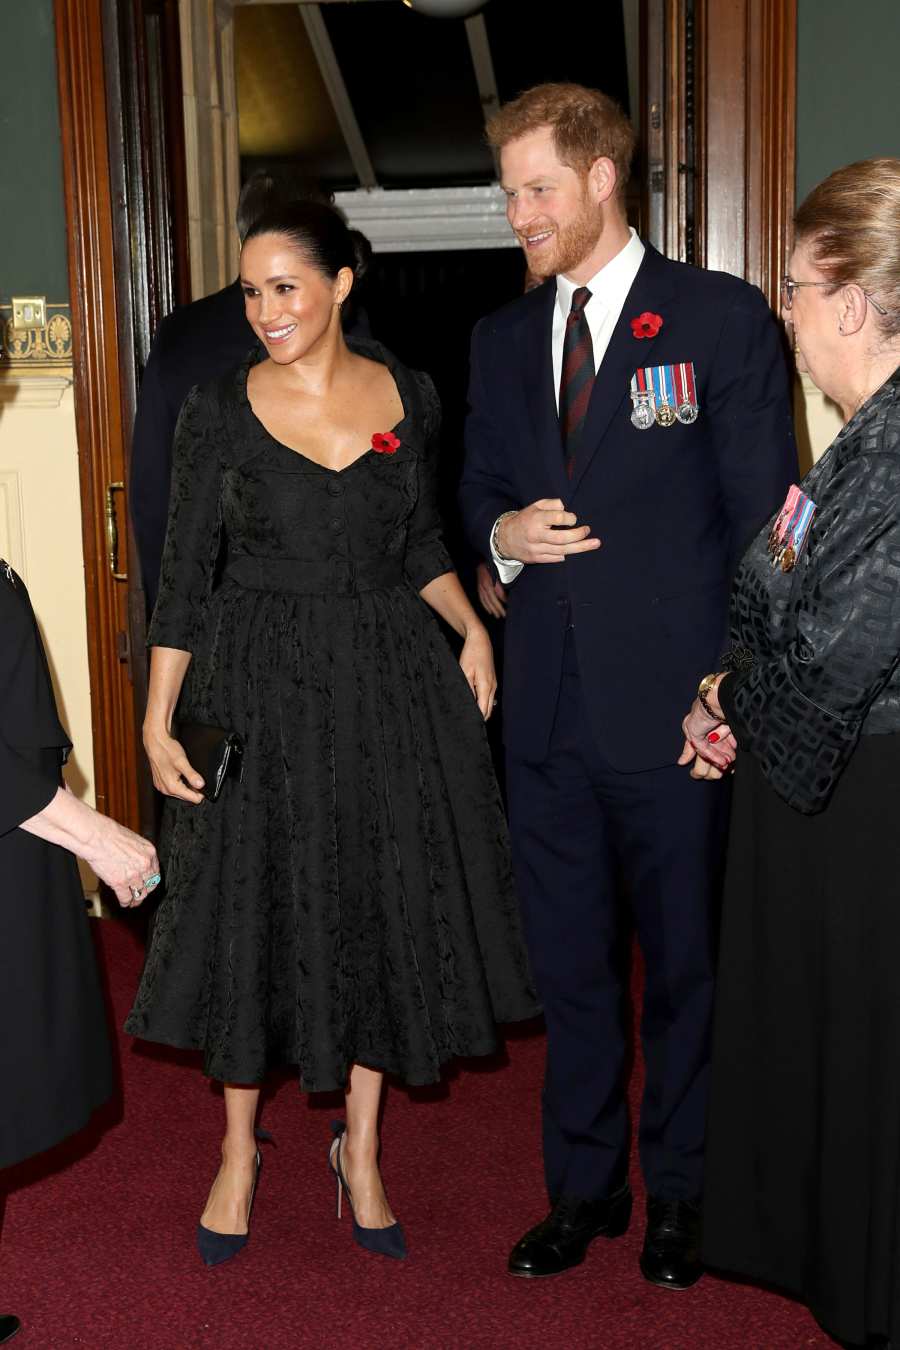 Duchess Meghan, Duchess Kate, Prince William and Prince Harry Reunite at Festival of Remembrance Service